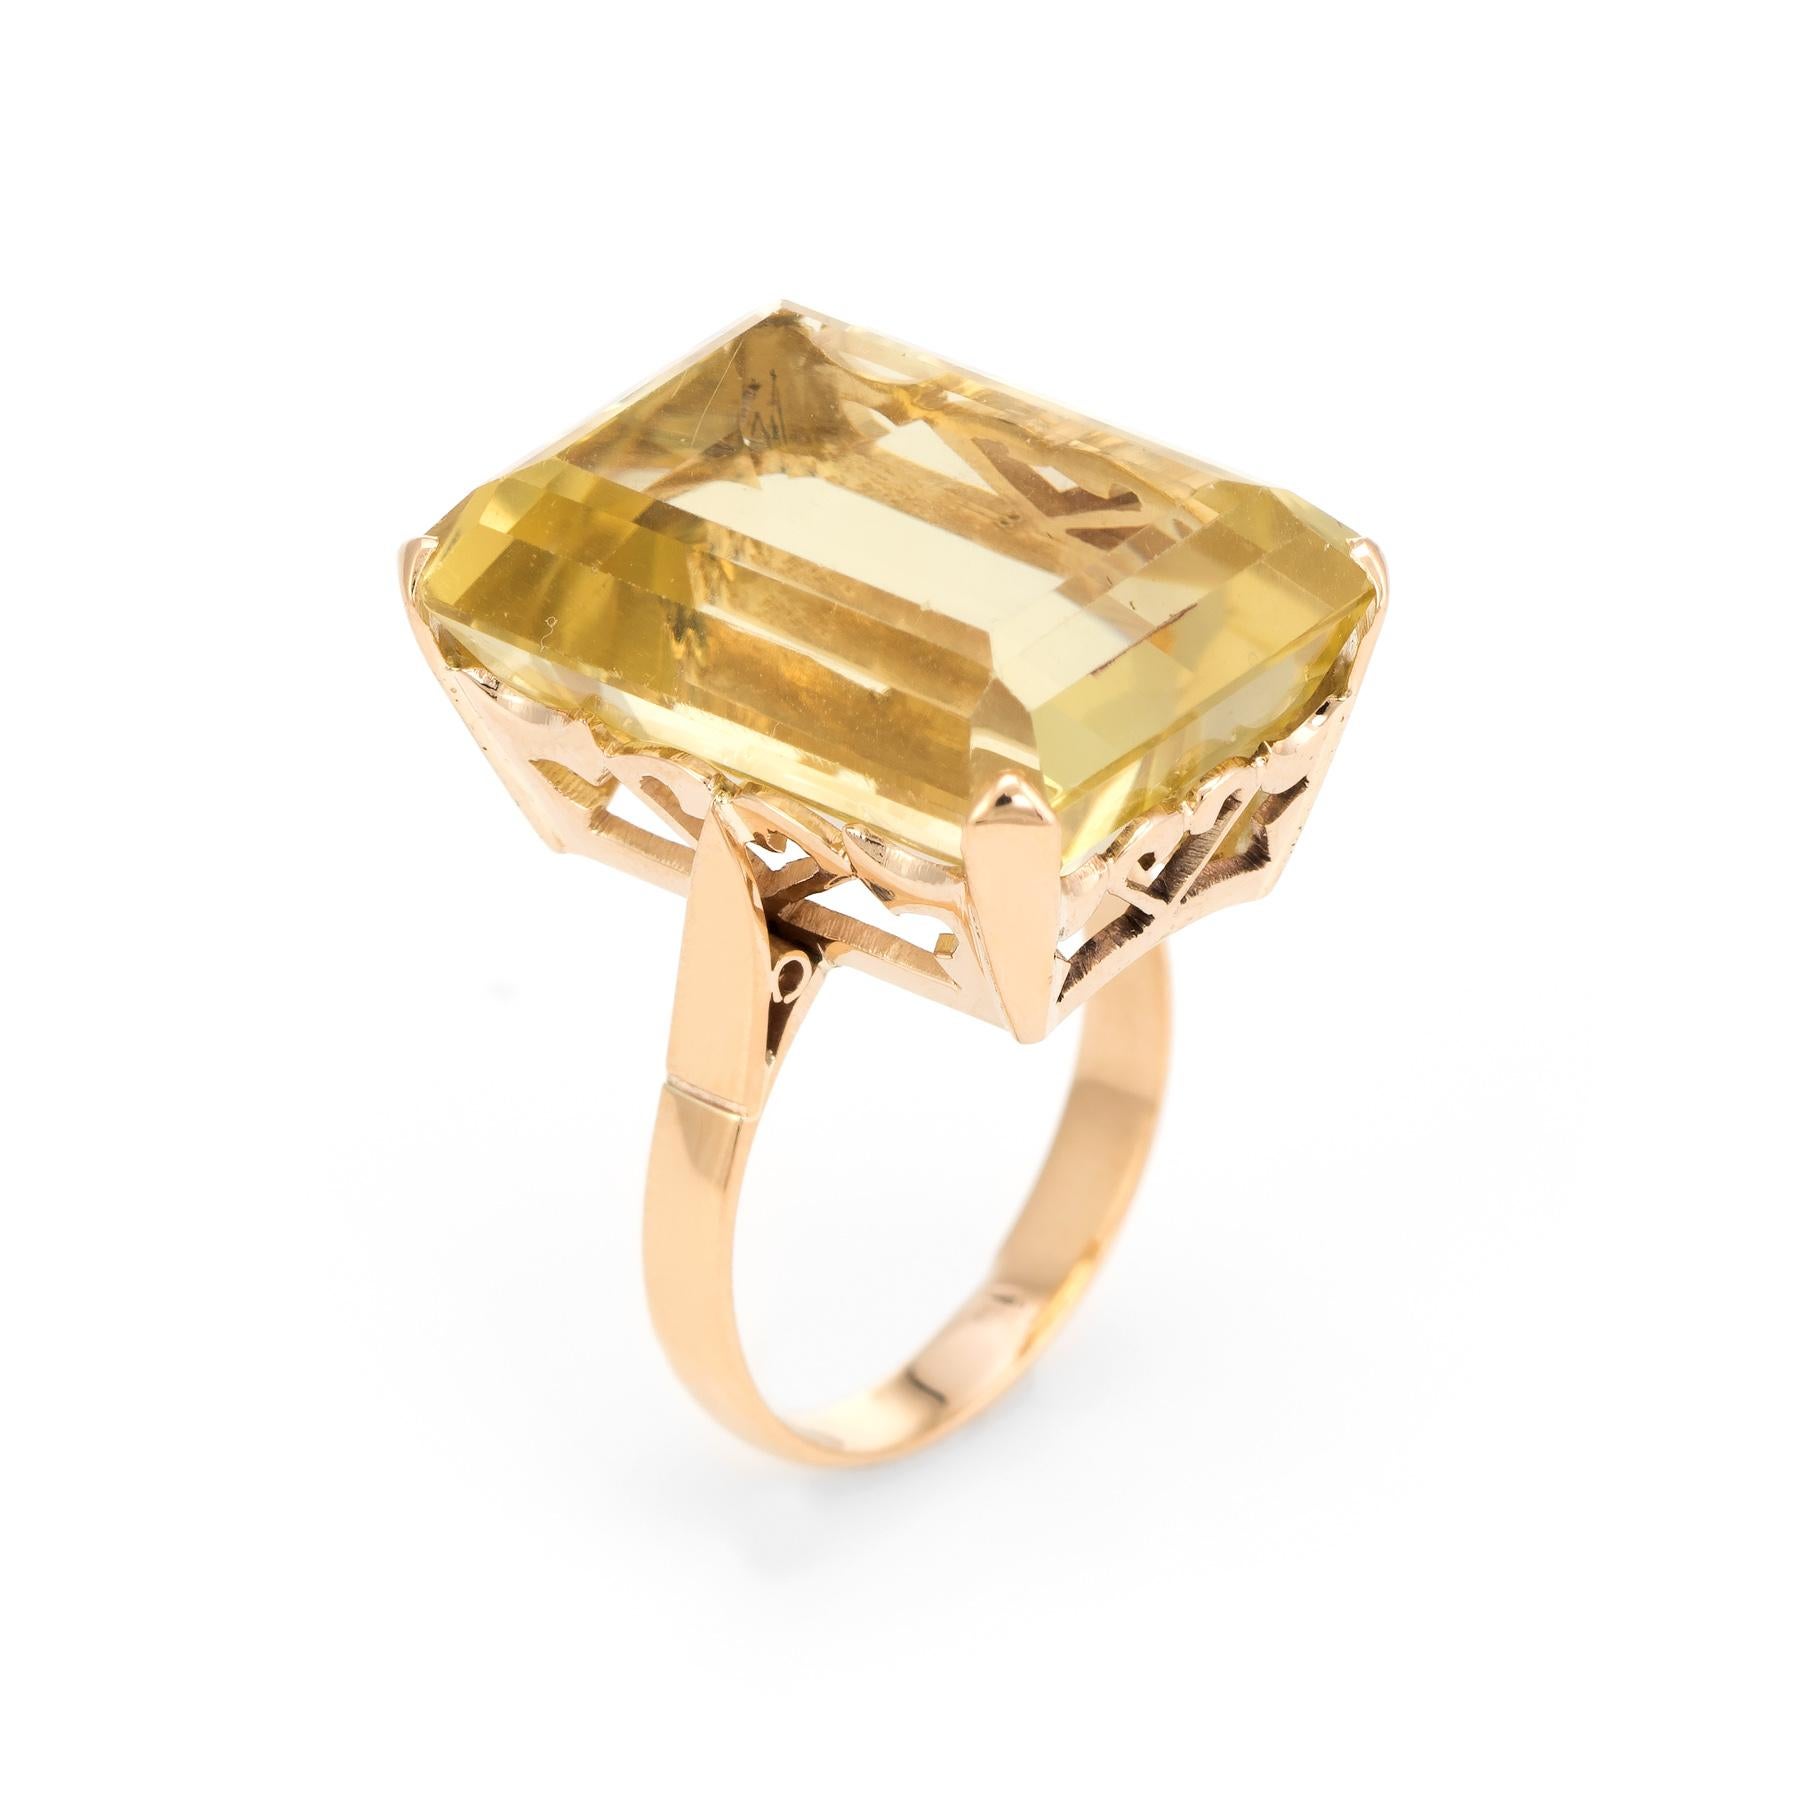 Circa 1950s to 1960s, a large statement cocktail ring is crafted in 18 karat yellow gold. 

The large emerald cut citrine measures 20mm x 15mm and is estimated at 25 carats. The citrine is in excellent condition and free of cracks or chips.  

The